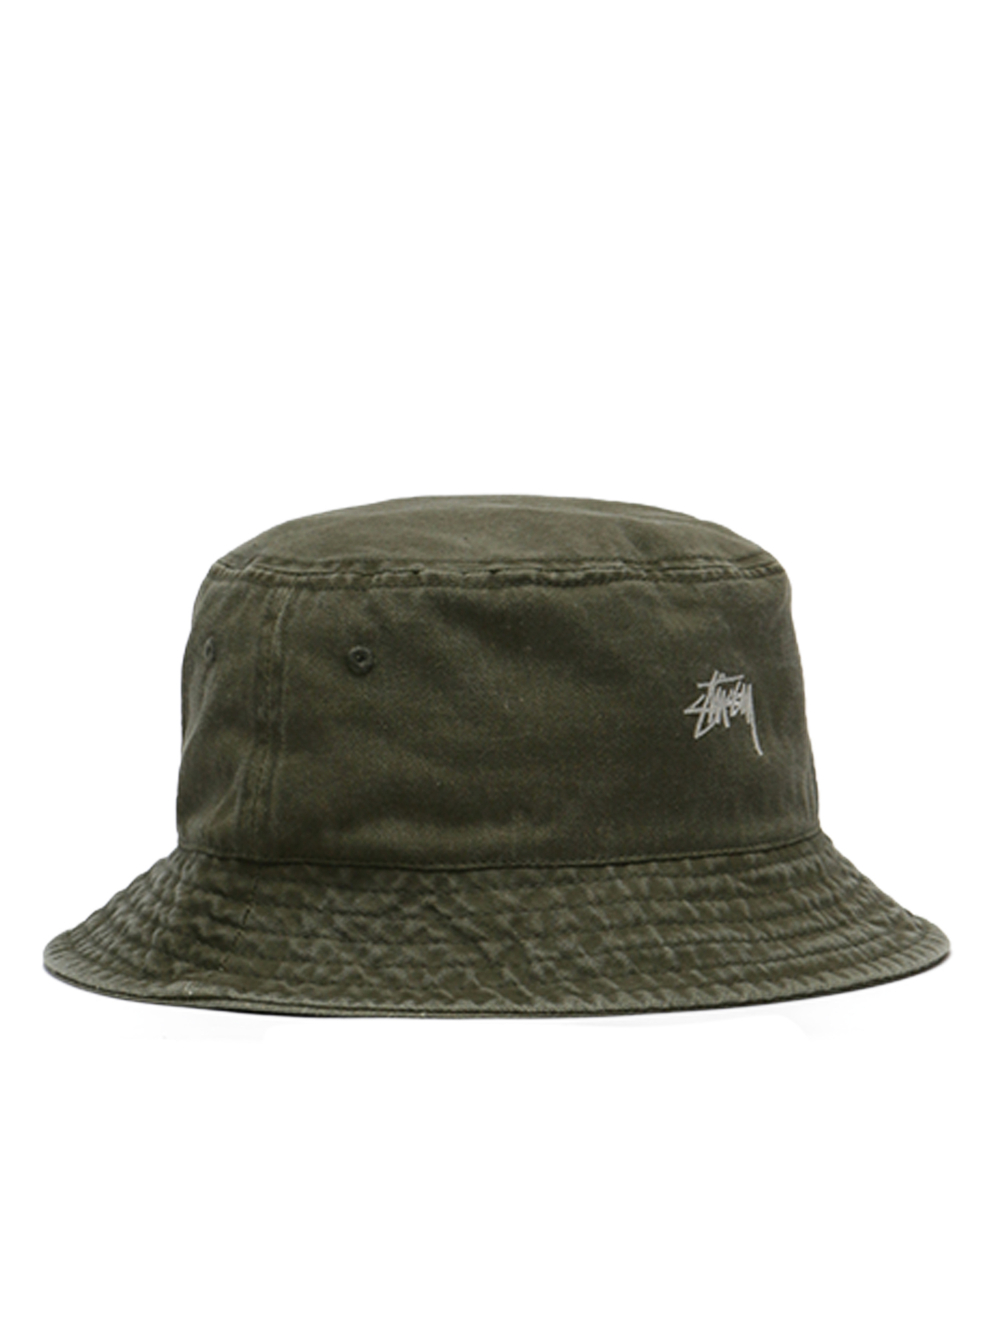 Панама Washed Stock Bucket Hat